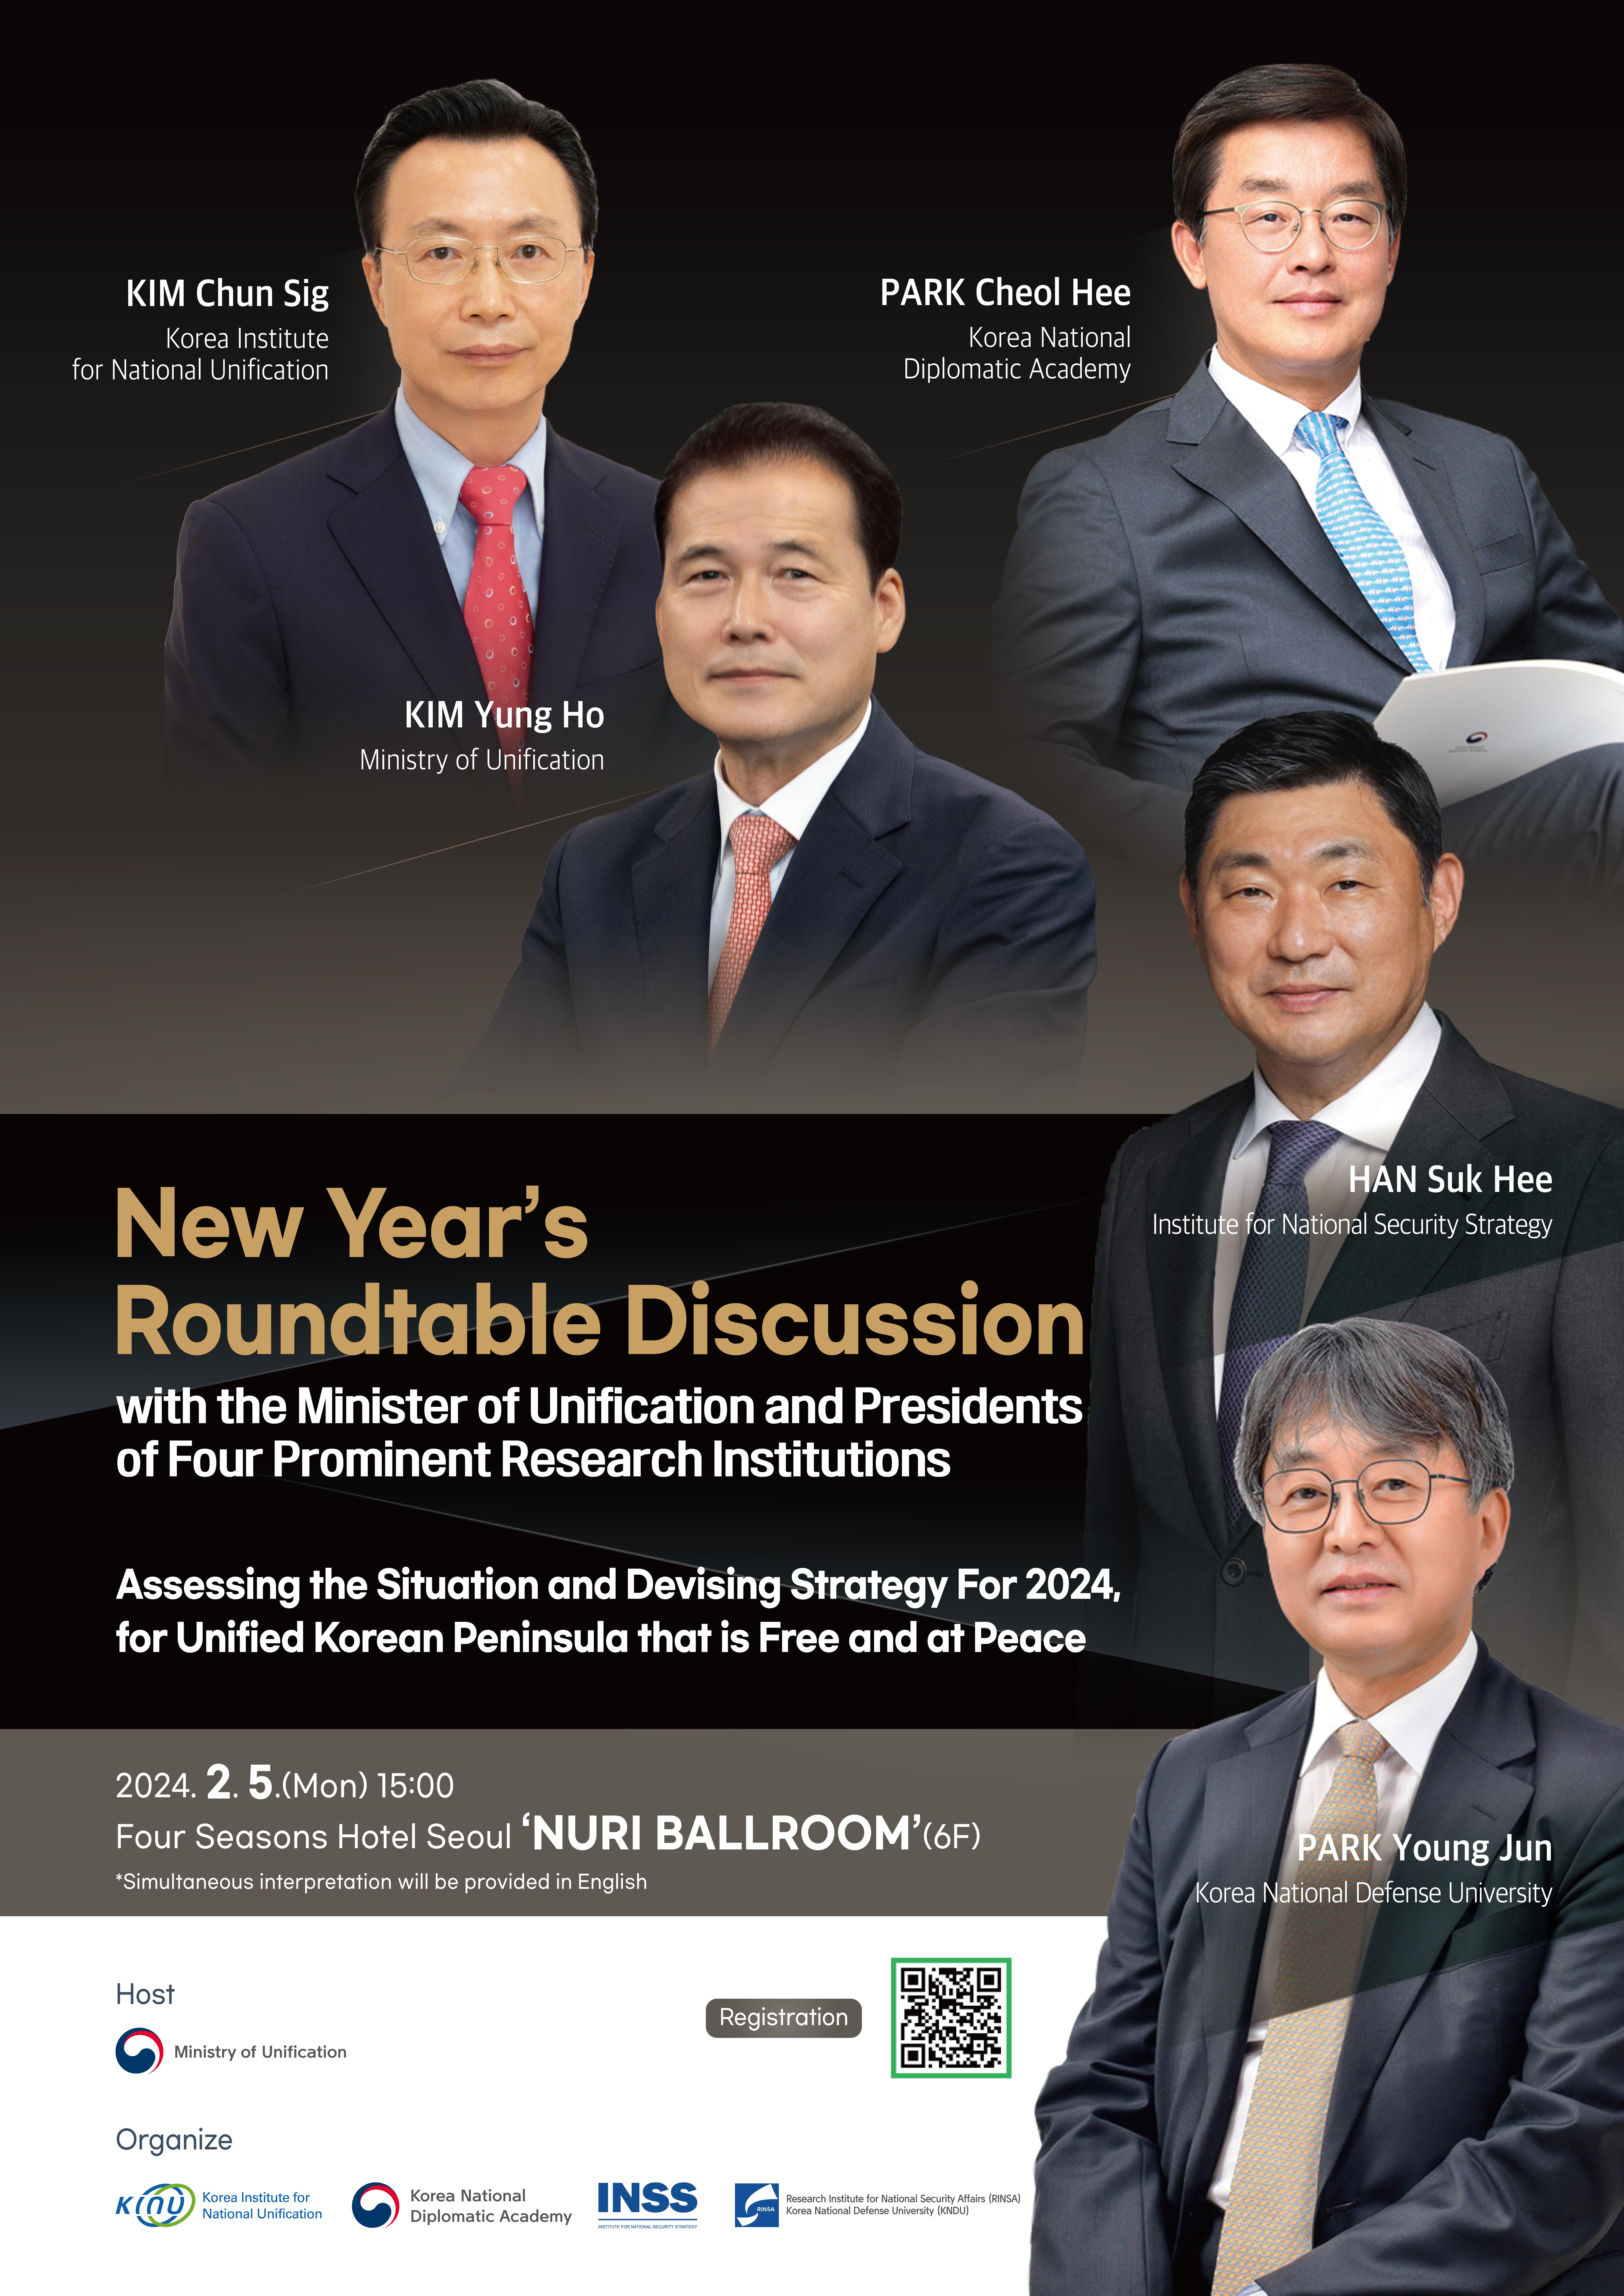 New Year’s Roundtable Discussion Poster.jpg Images